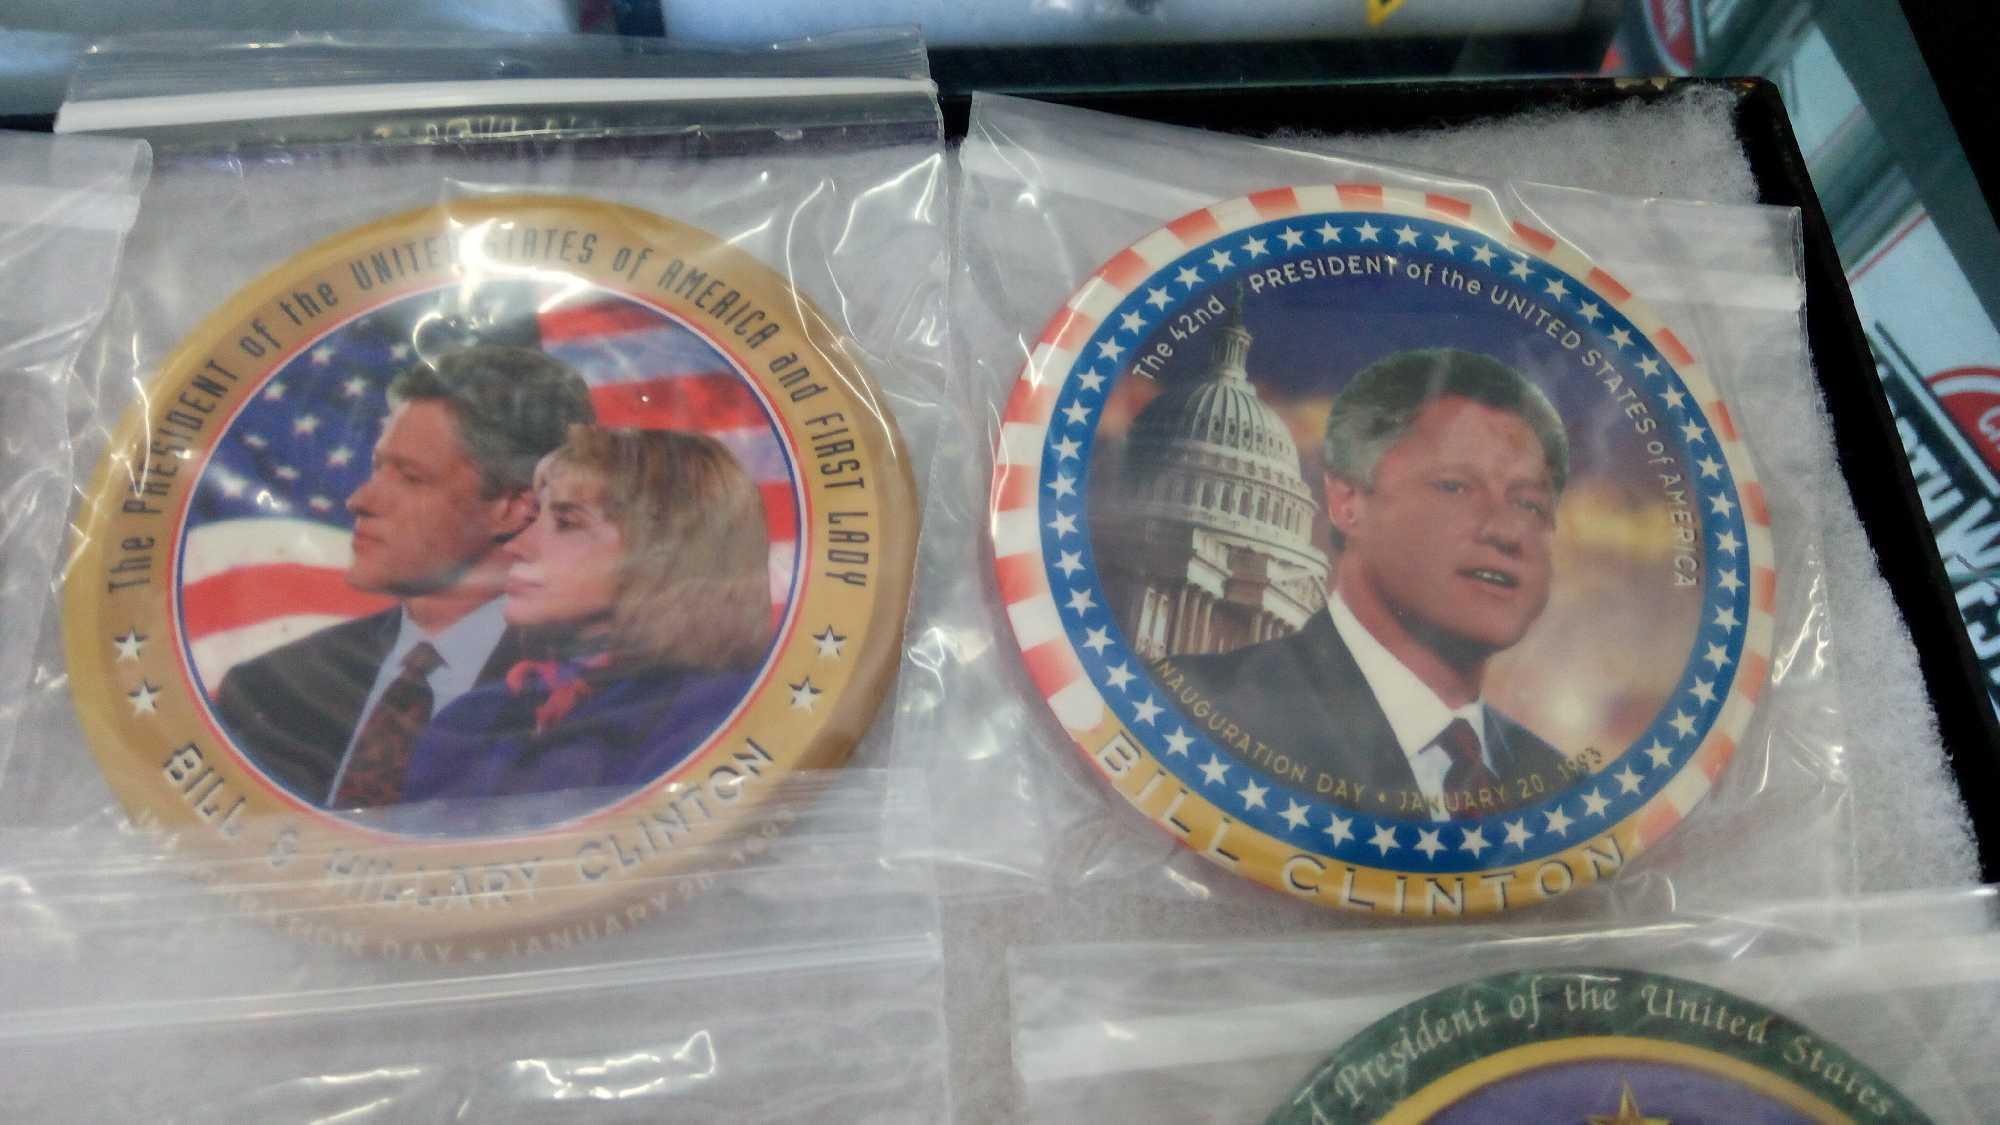 (12) BILL CLINTON 1993 INAUGURATION DAY PINS, 3.5" BUTTONS